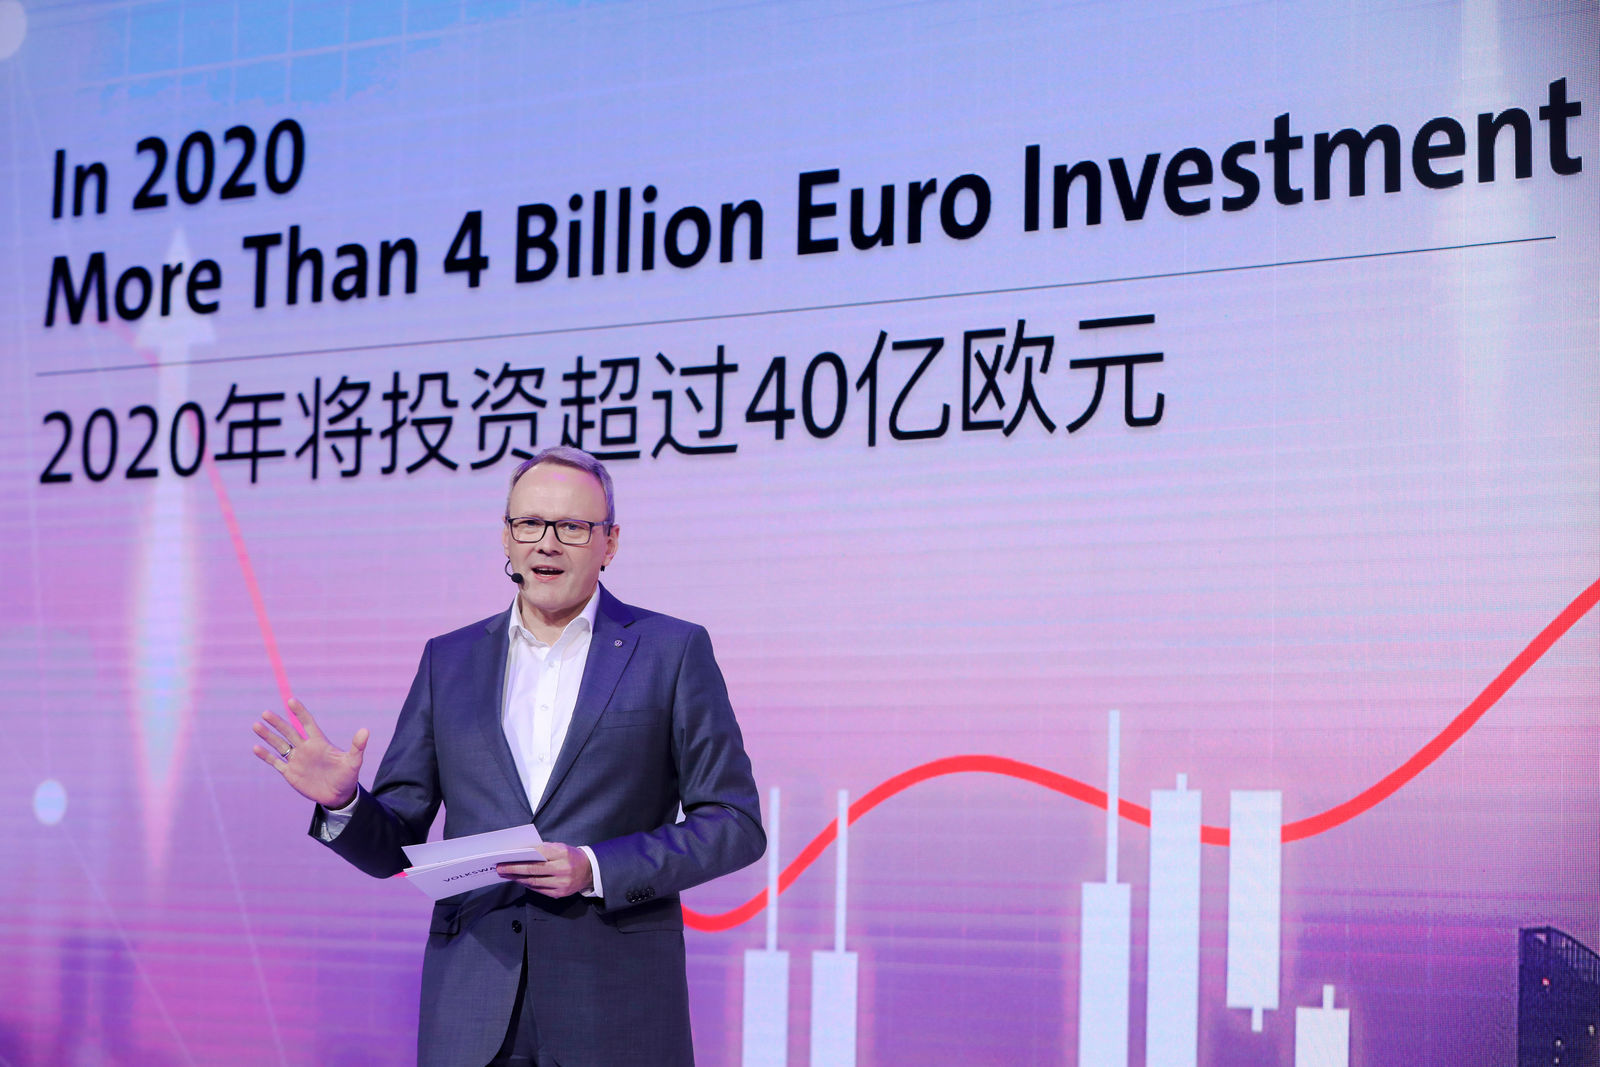 Volkswagen Group China to invest over 4 billion Euro in 2020